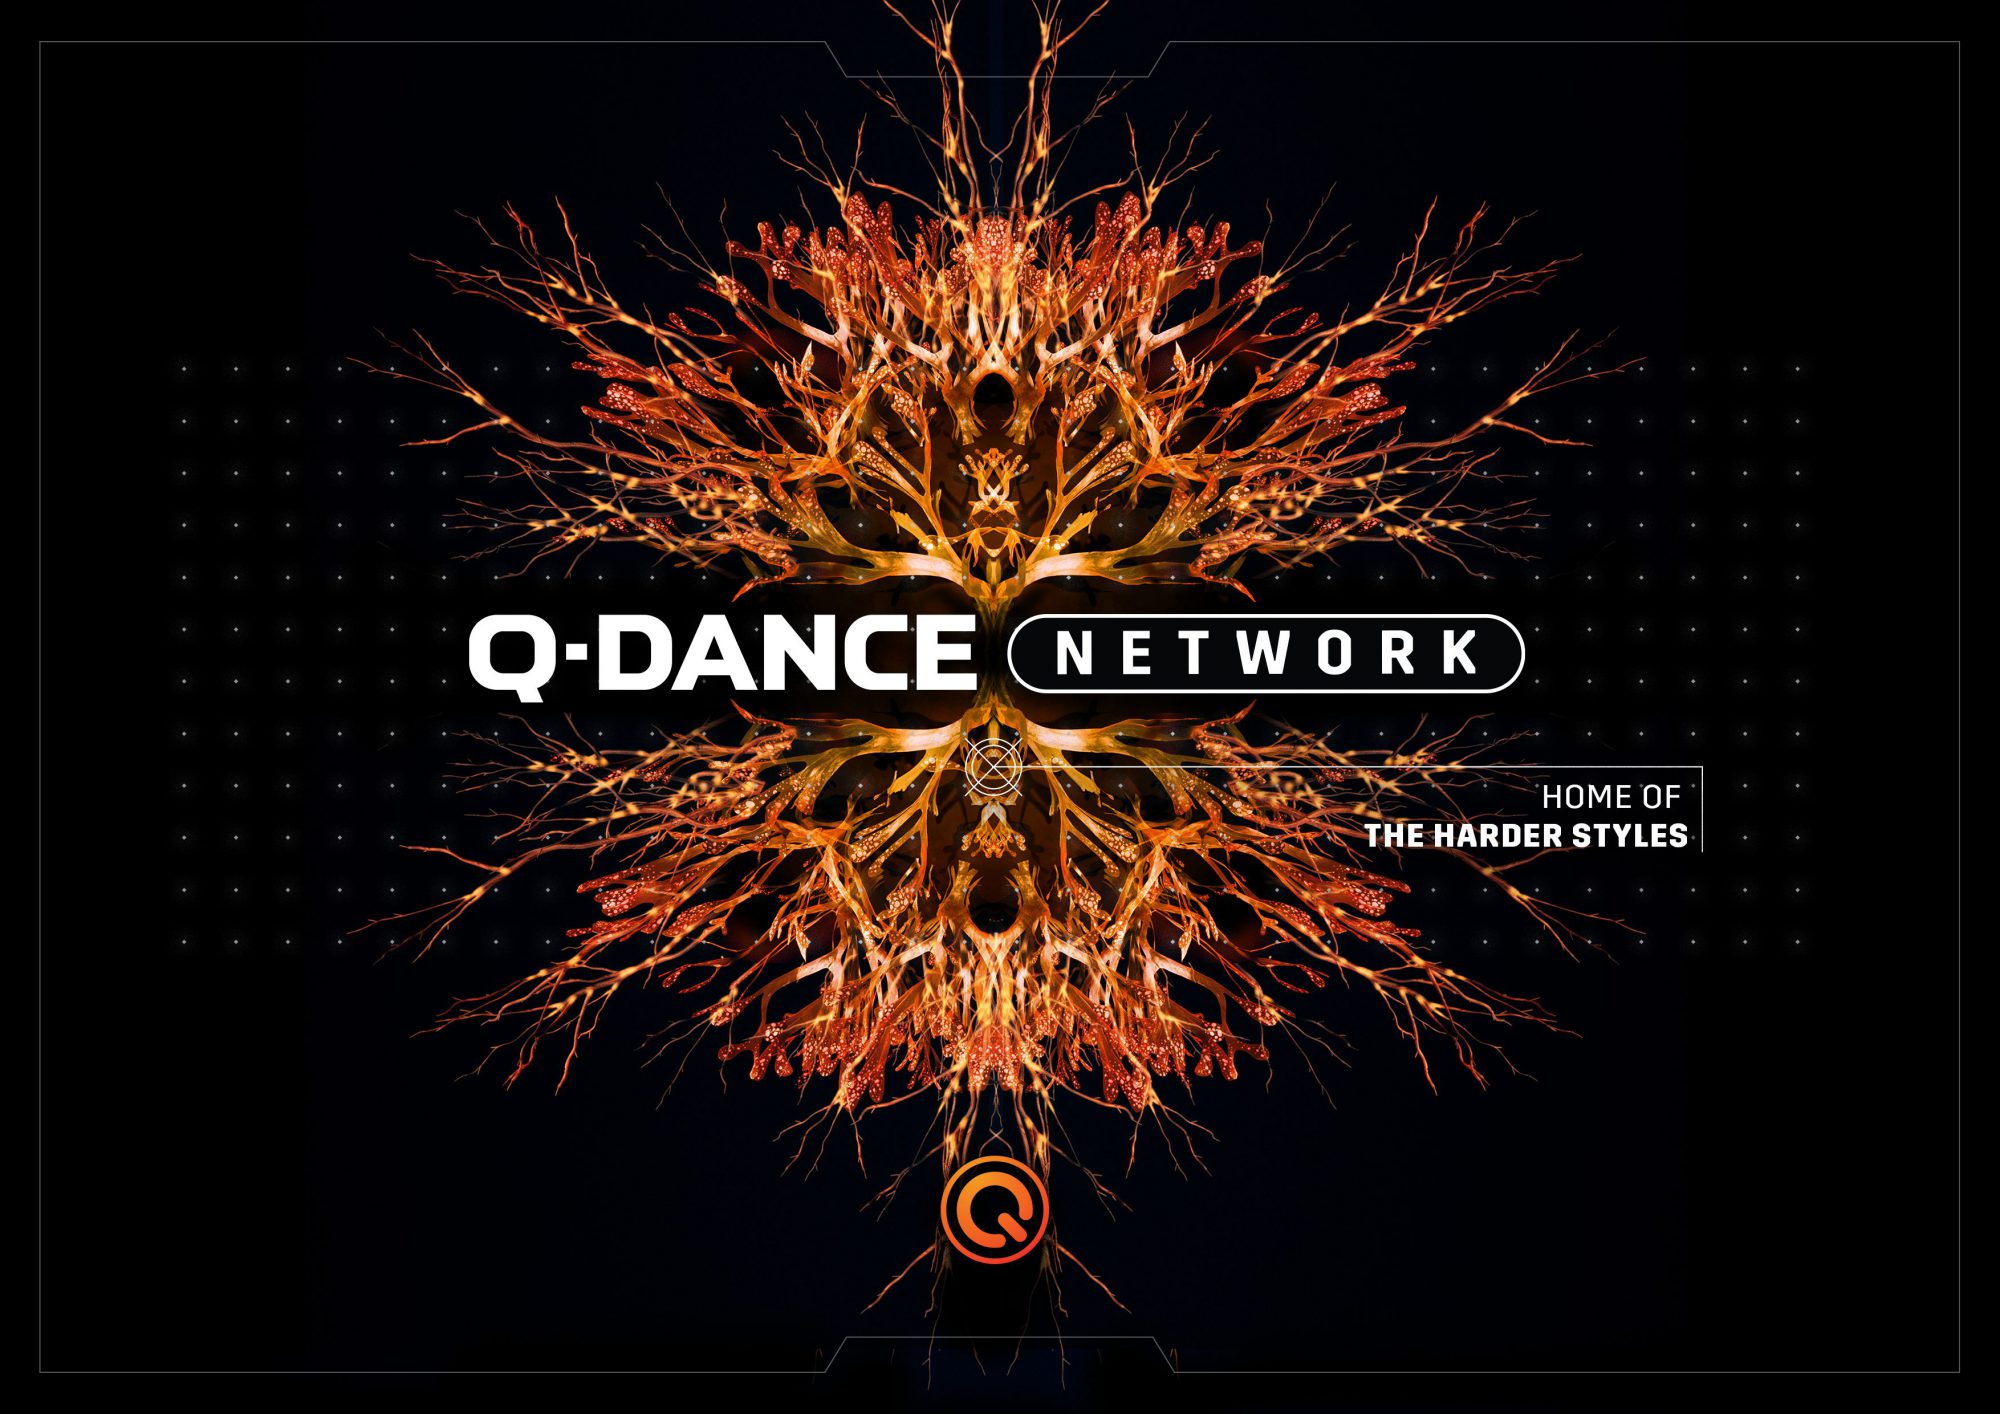 The Q-dance Network